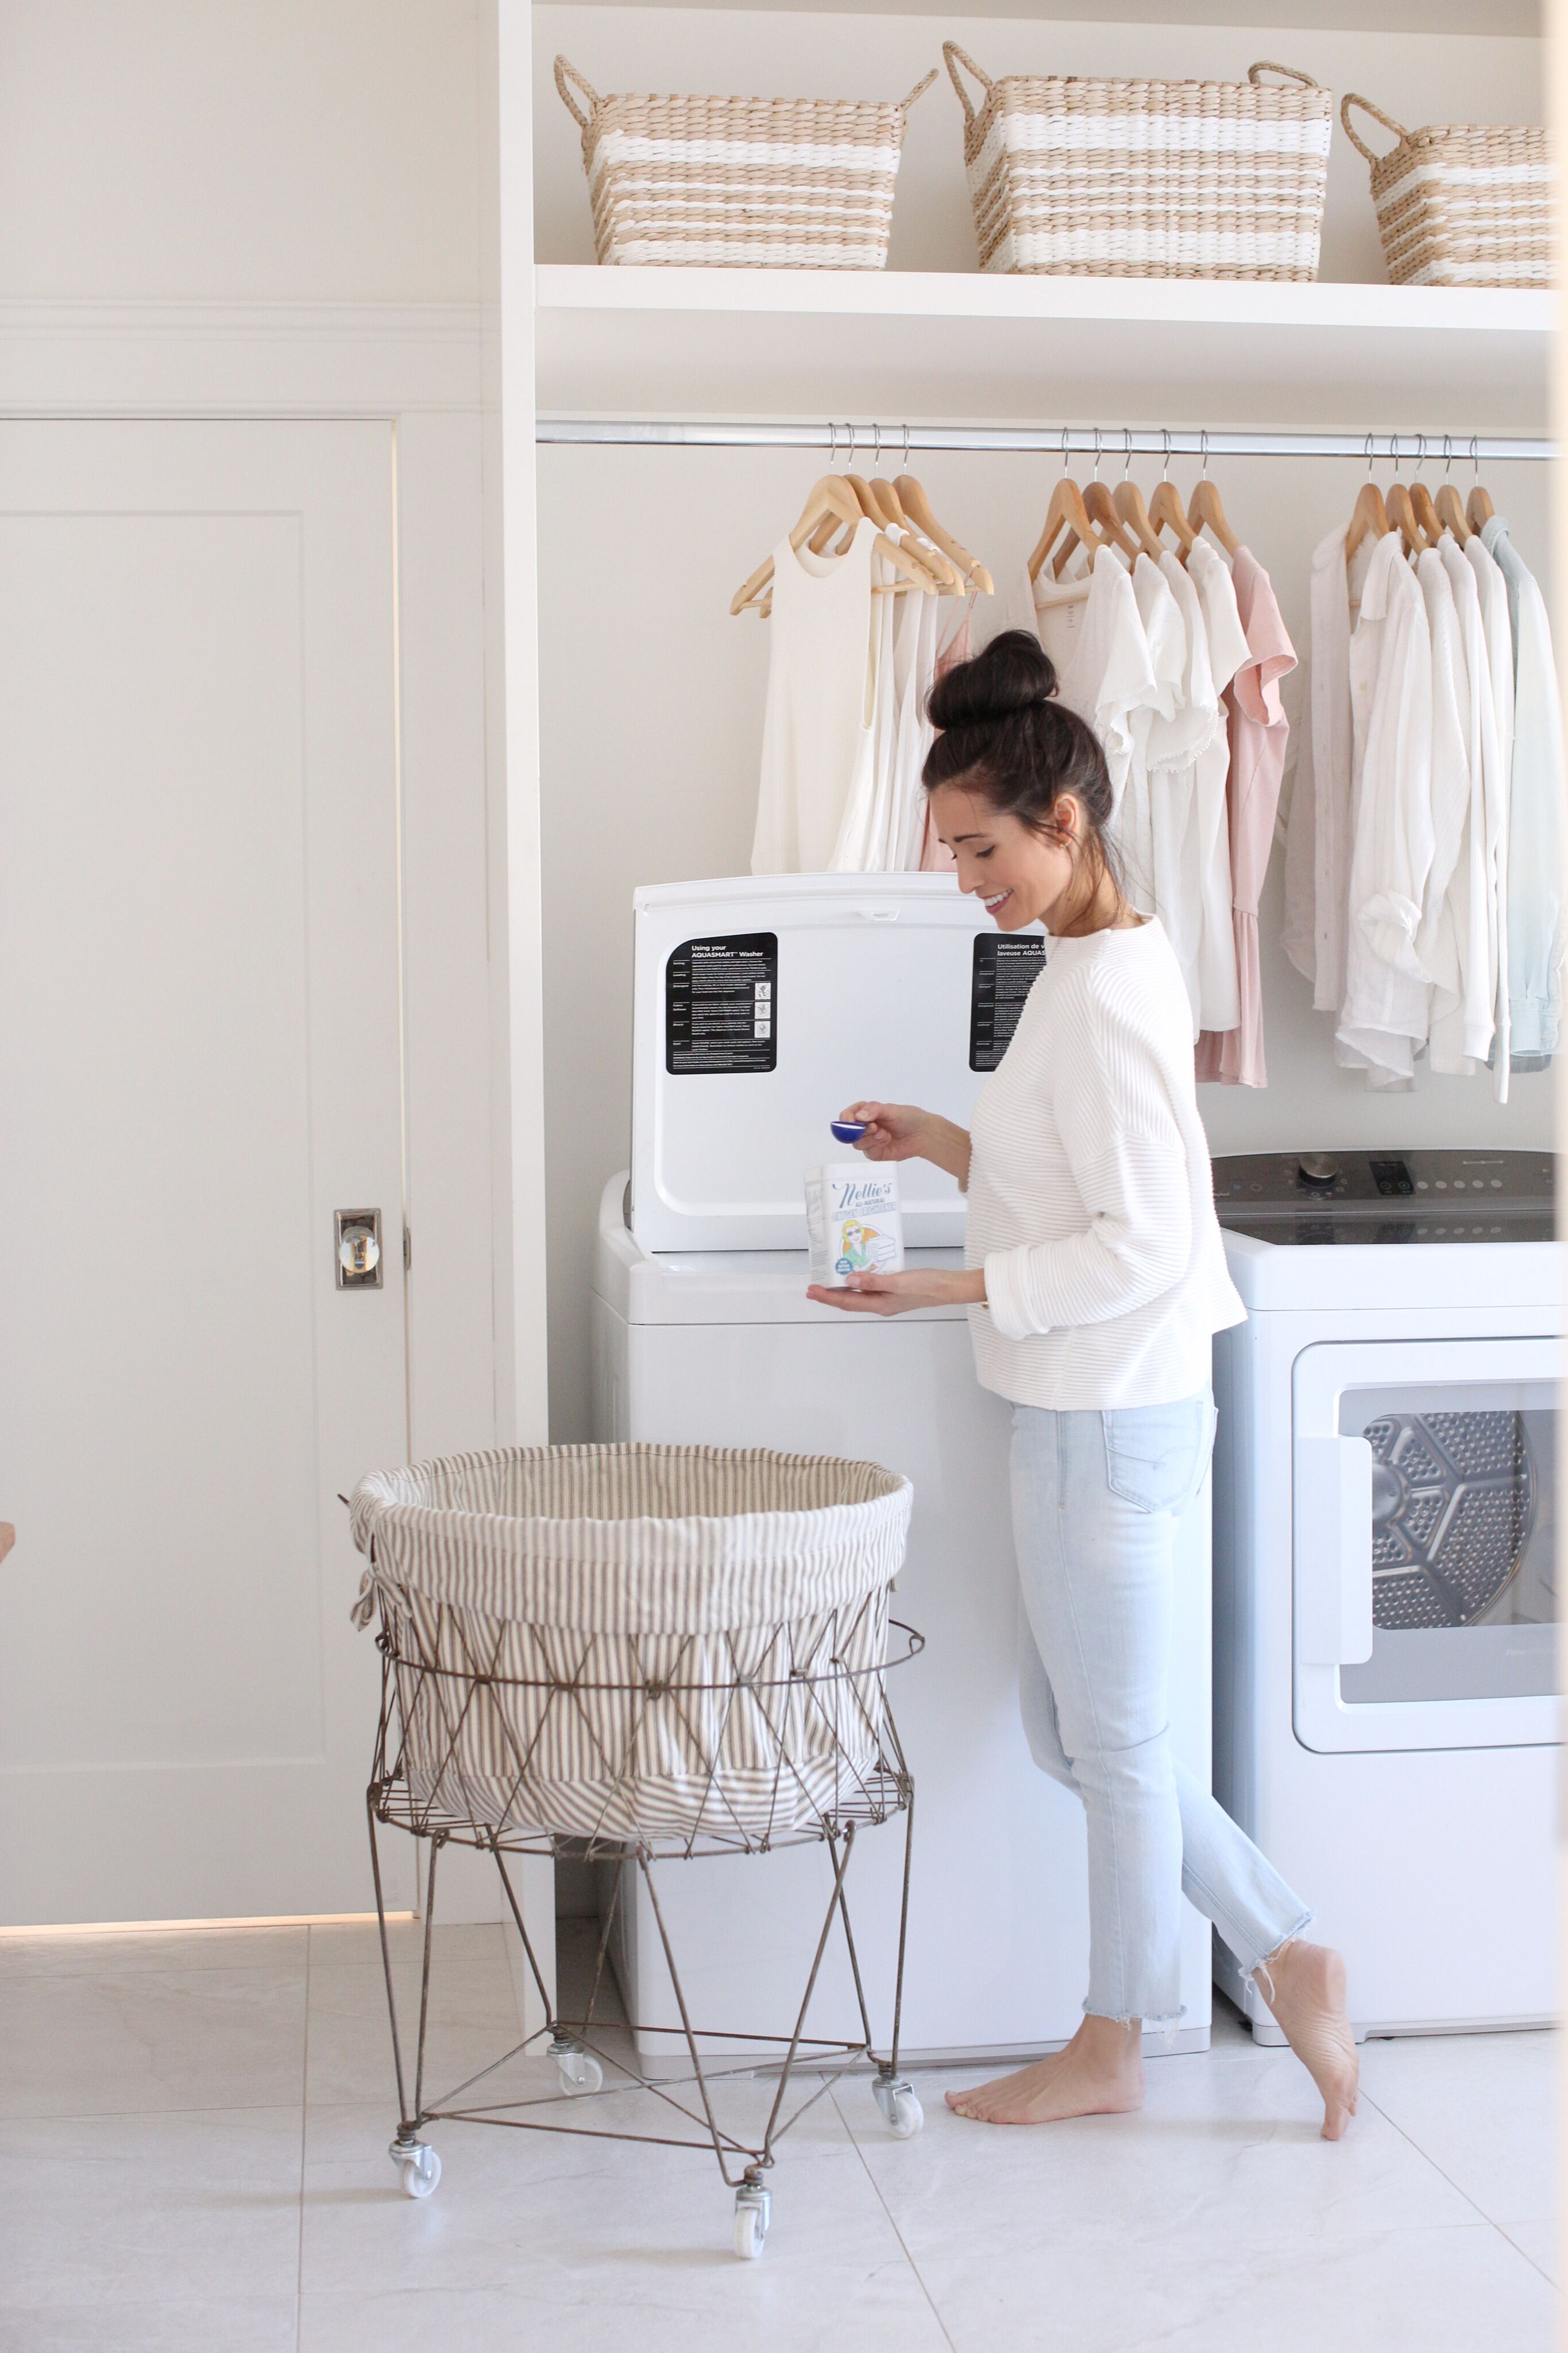 Laundry Room Reveal from Tor Wesszer at FraicheNutrition.com complete with all of the white, airy details including paint colours, farm house sinks, brass hardware, shiplap and the best top loading washer and dryer!